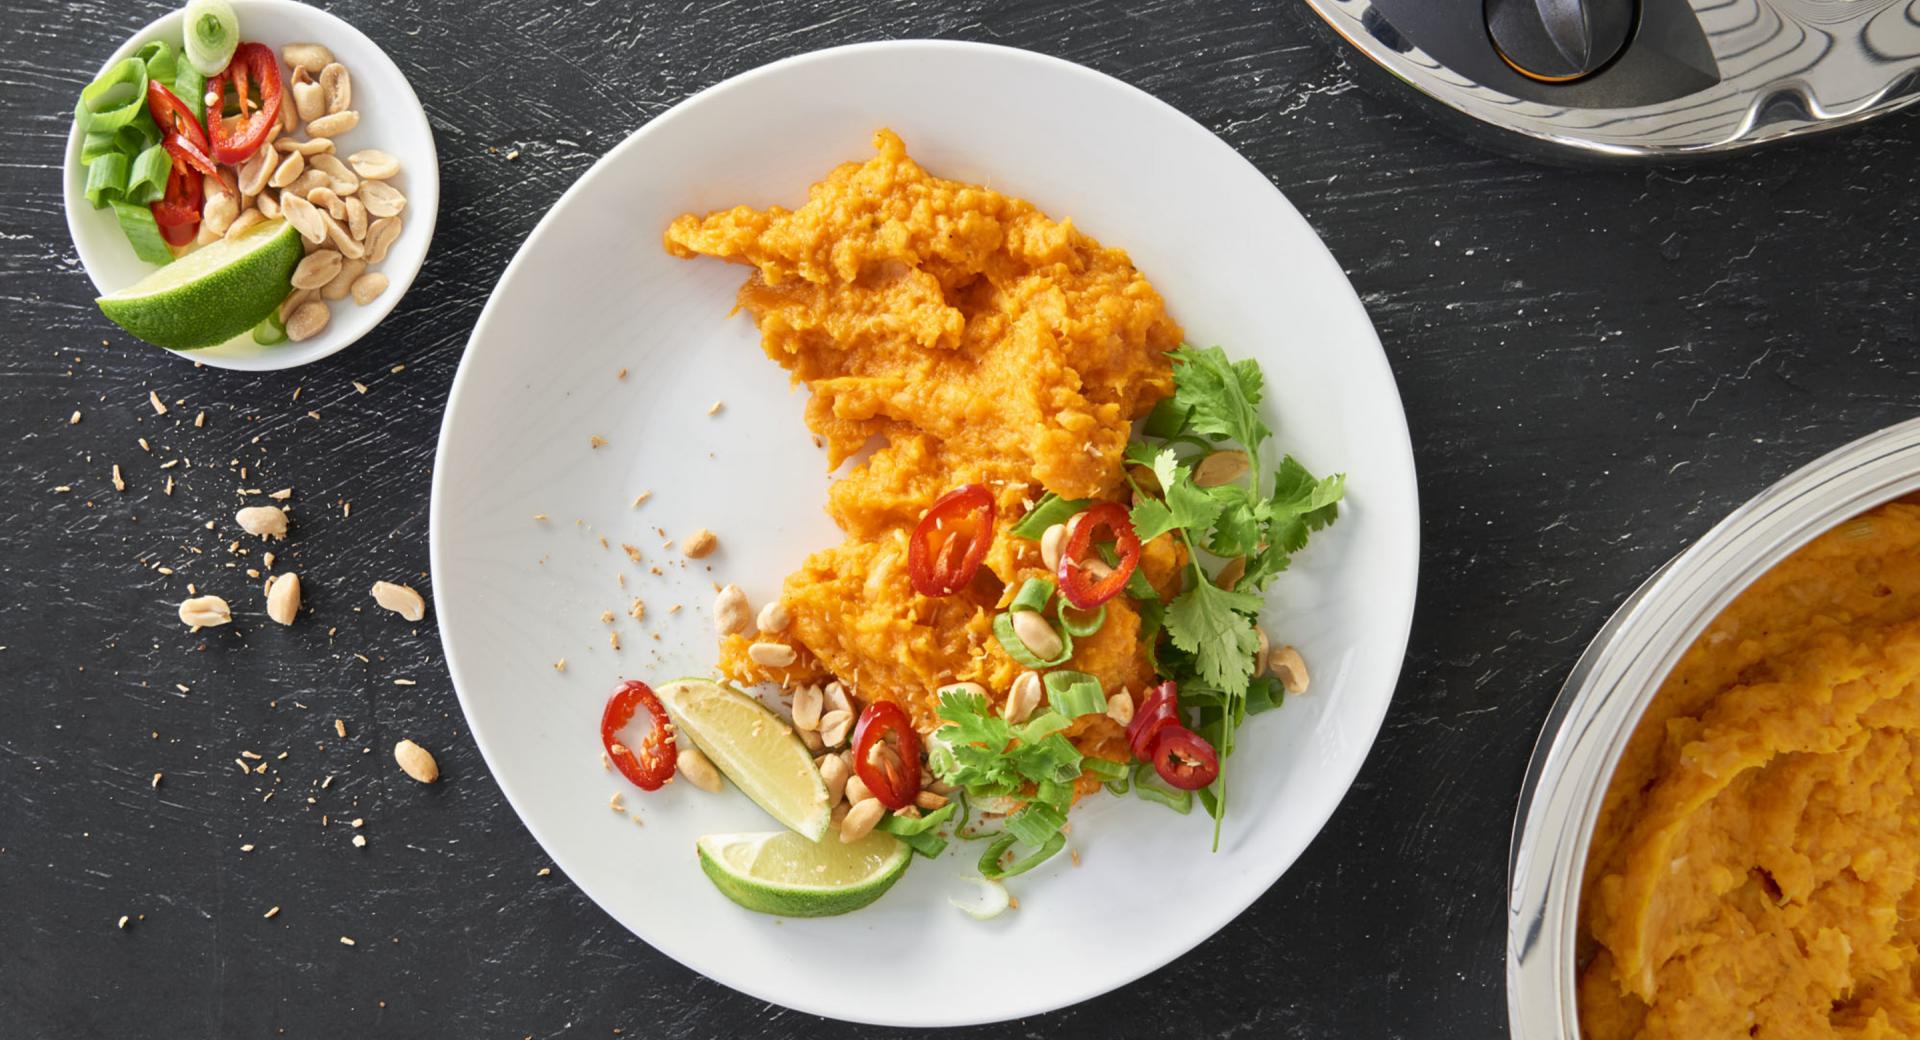 “Thai-style” mashed sweet potatoes with coconut milk